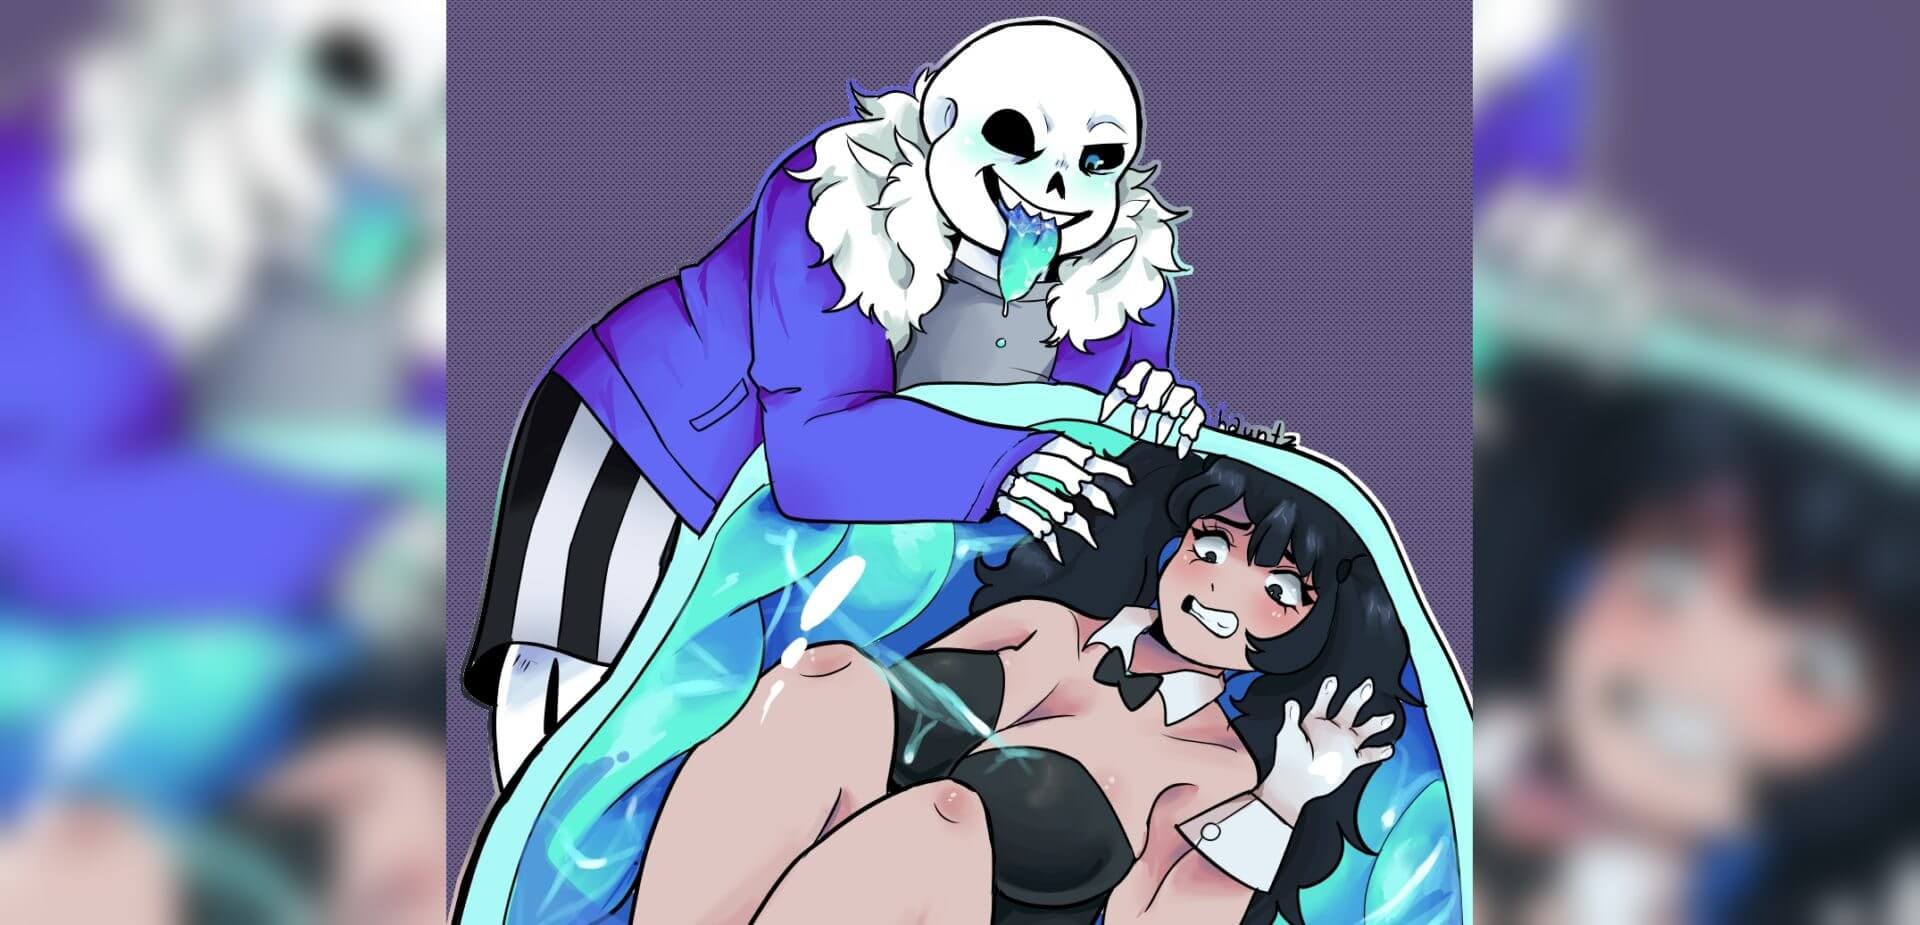 Sans from Undertale consumes a human woman in this "same-size vore" illustration.